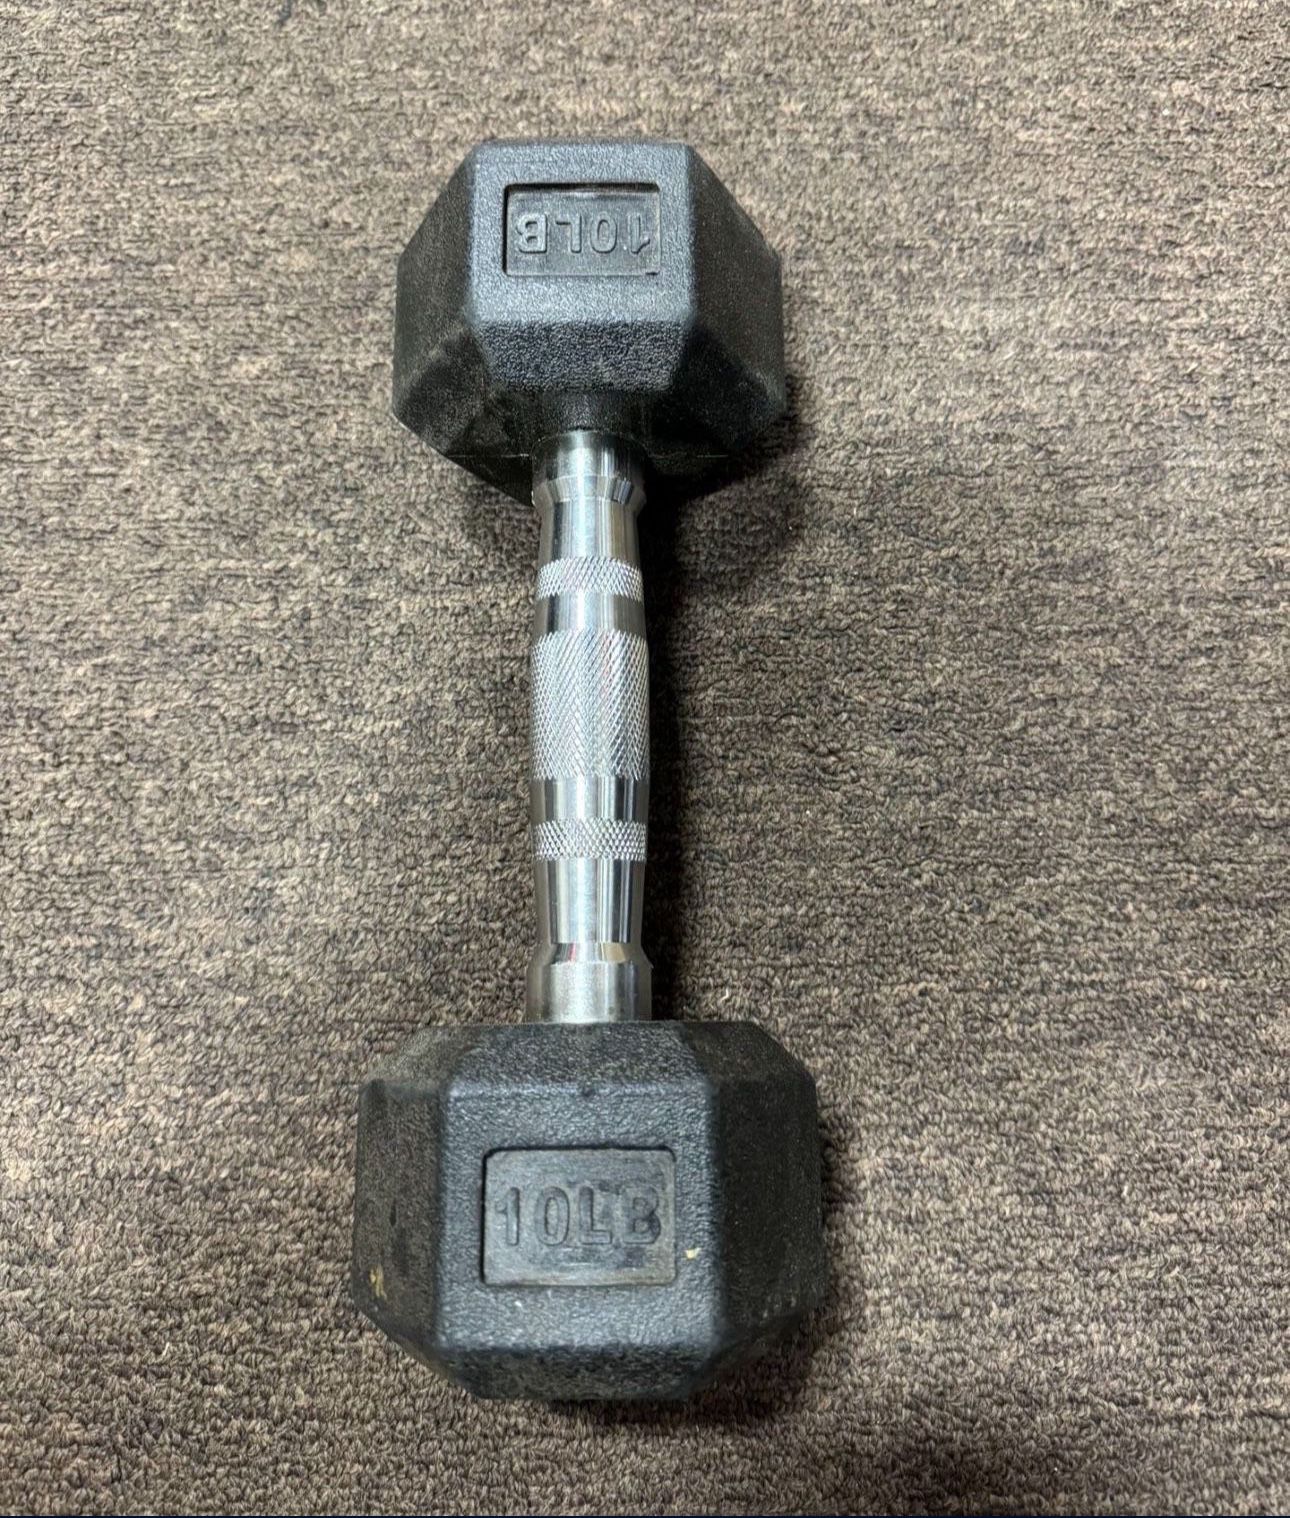 Dumbbell 10lbs Single CAP BARBELL COATED $10